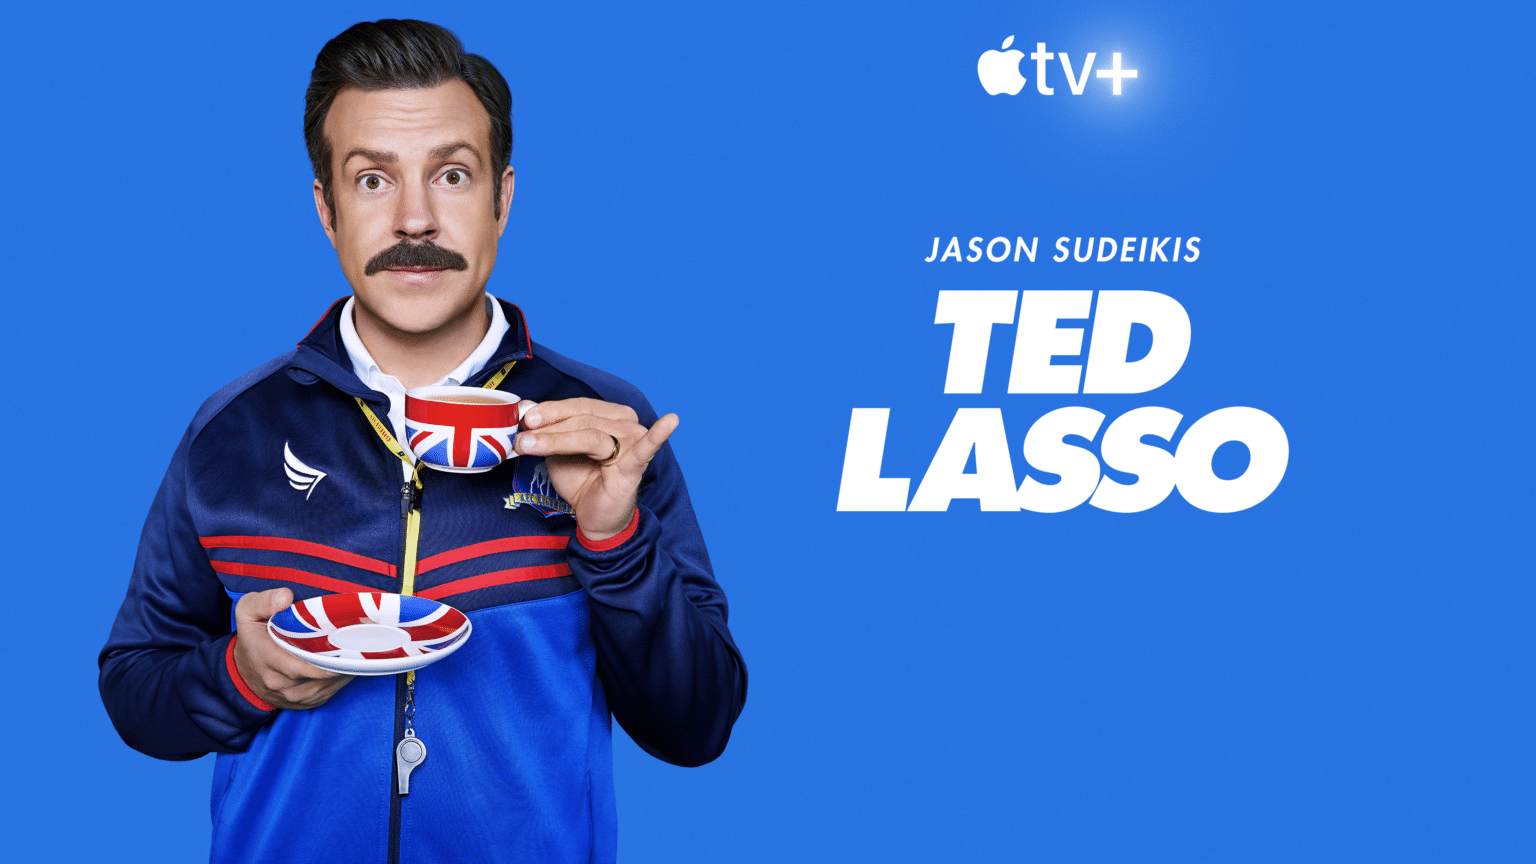 "Ted Lasso"